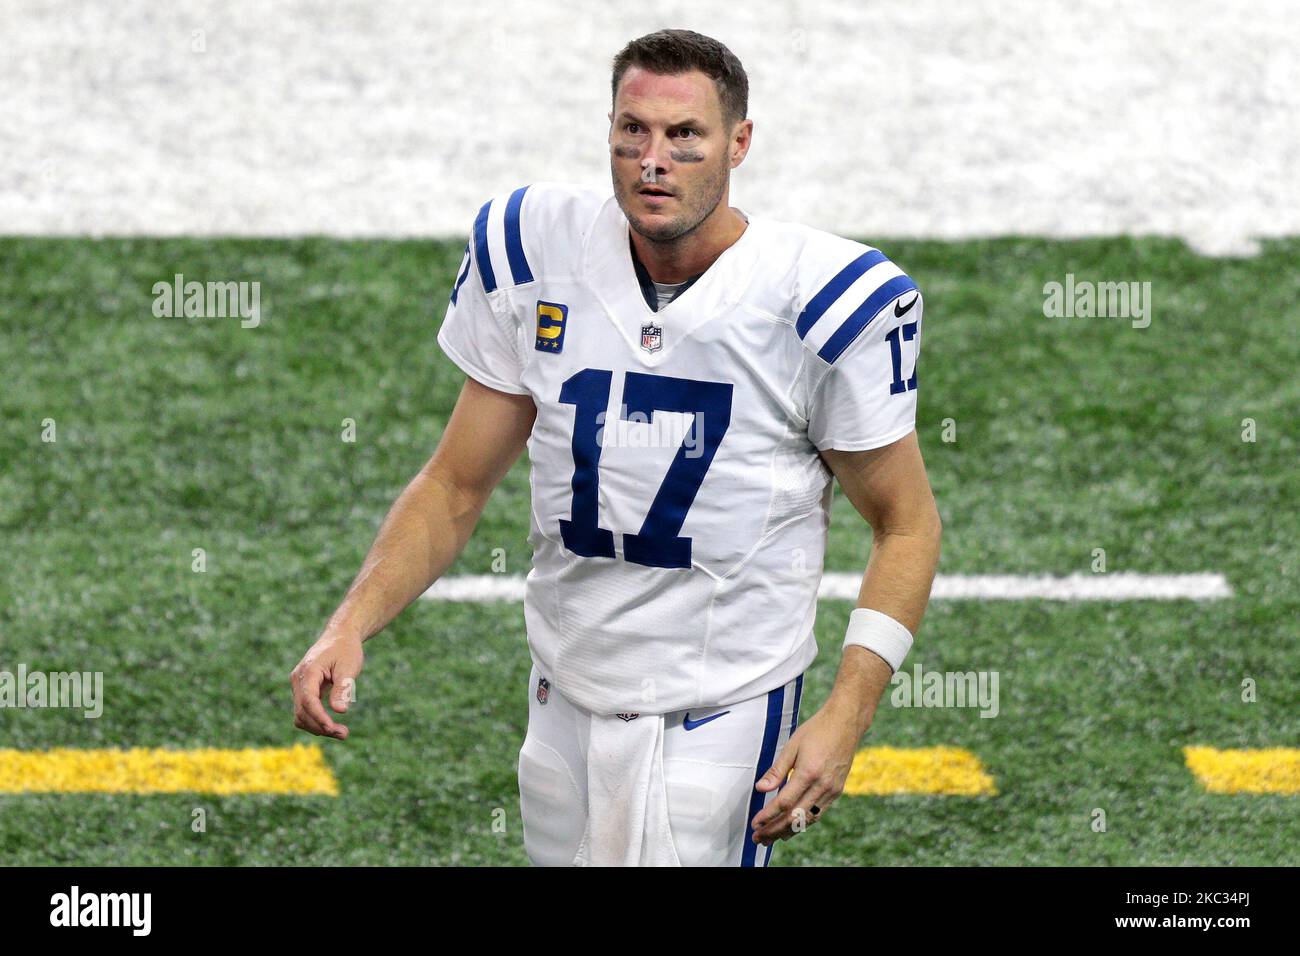 Indianapolis Colts quarterback Philip Rivers (17) walks off the field after an NFL football game against the Detroit Lions in Detroit, Michigan USA, on Sunday, November 1, 2020 (Photo by Jorge Lemus/NurPhoto) Stock Photo